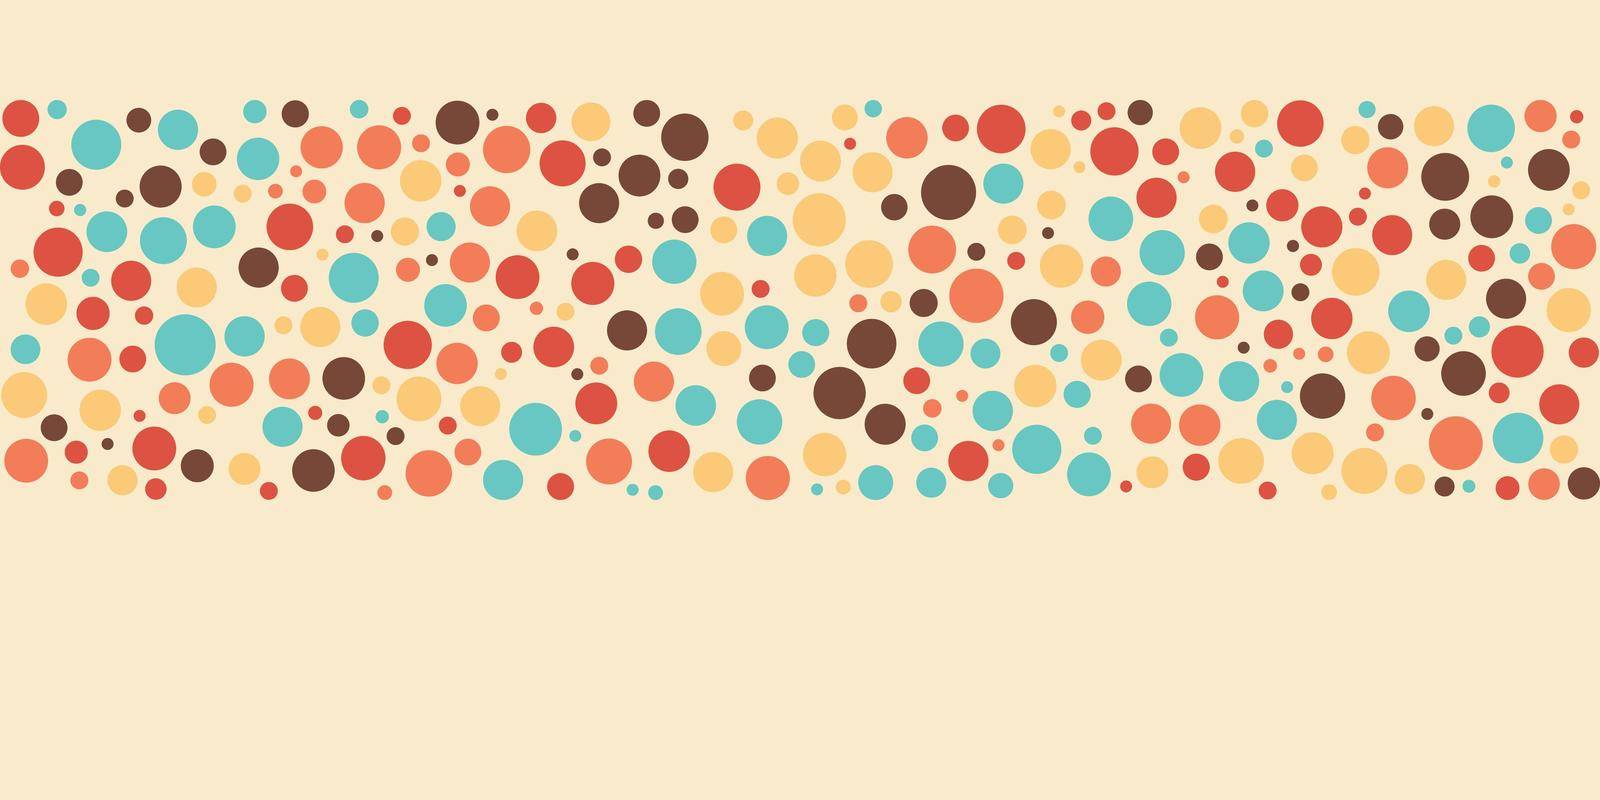 Minimal circle abstract background design, multicolored template for business or technology presentation or web brochure cover layout, wallpaper. Vector illustration